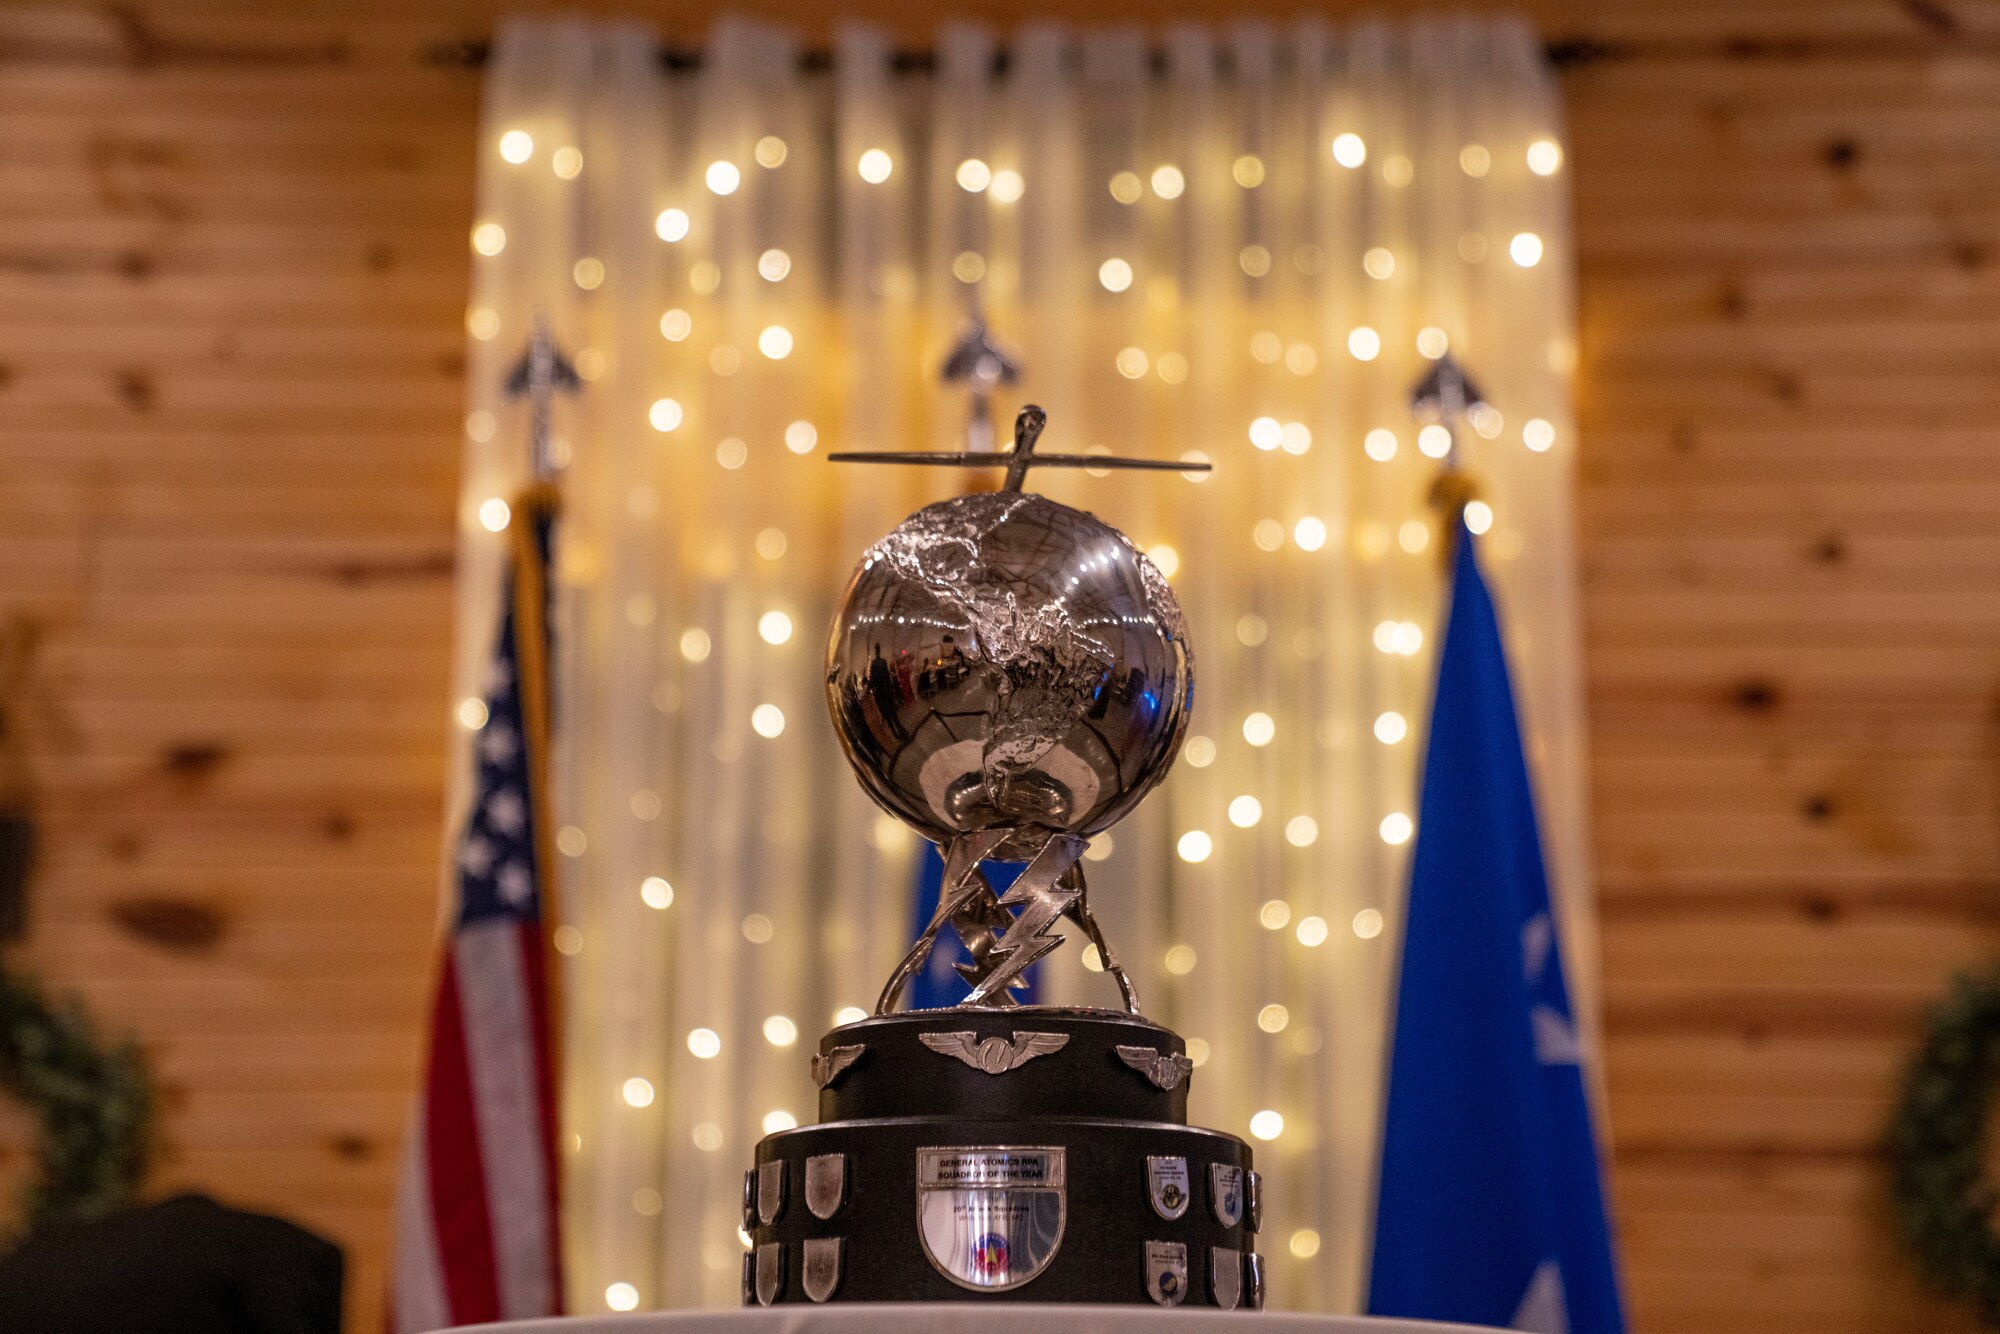 The rotating General Atomics Remotely Piloted Aircraft Squadron of the year trophy which involves a silver metal globe propped up by twisted, metal lightning bolts and topped with a metal RPA sitting in front of the United States flag, the U.S. Air Force flag and white holiday lights.